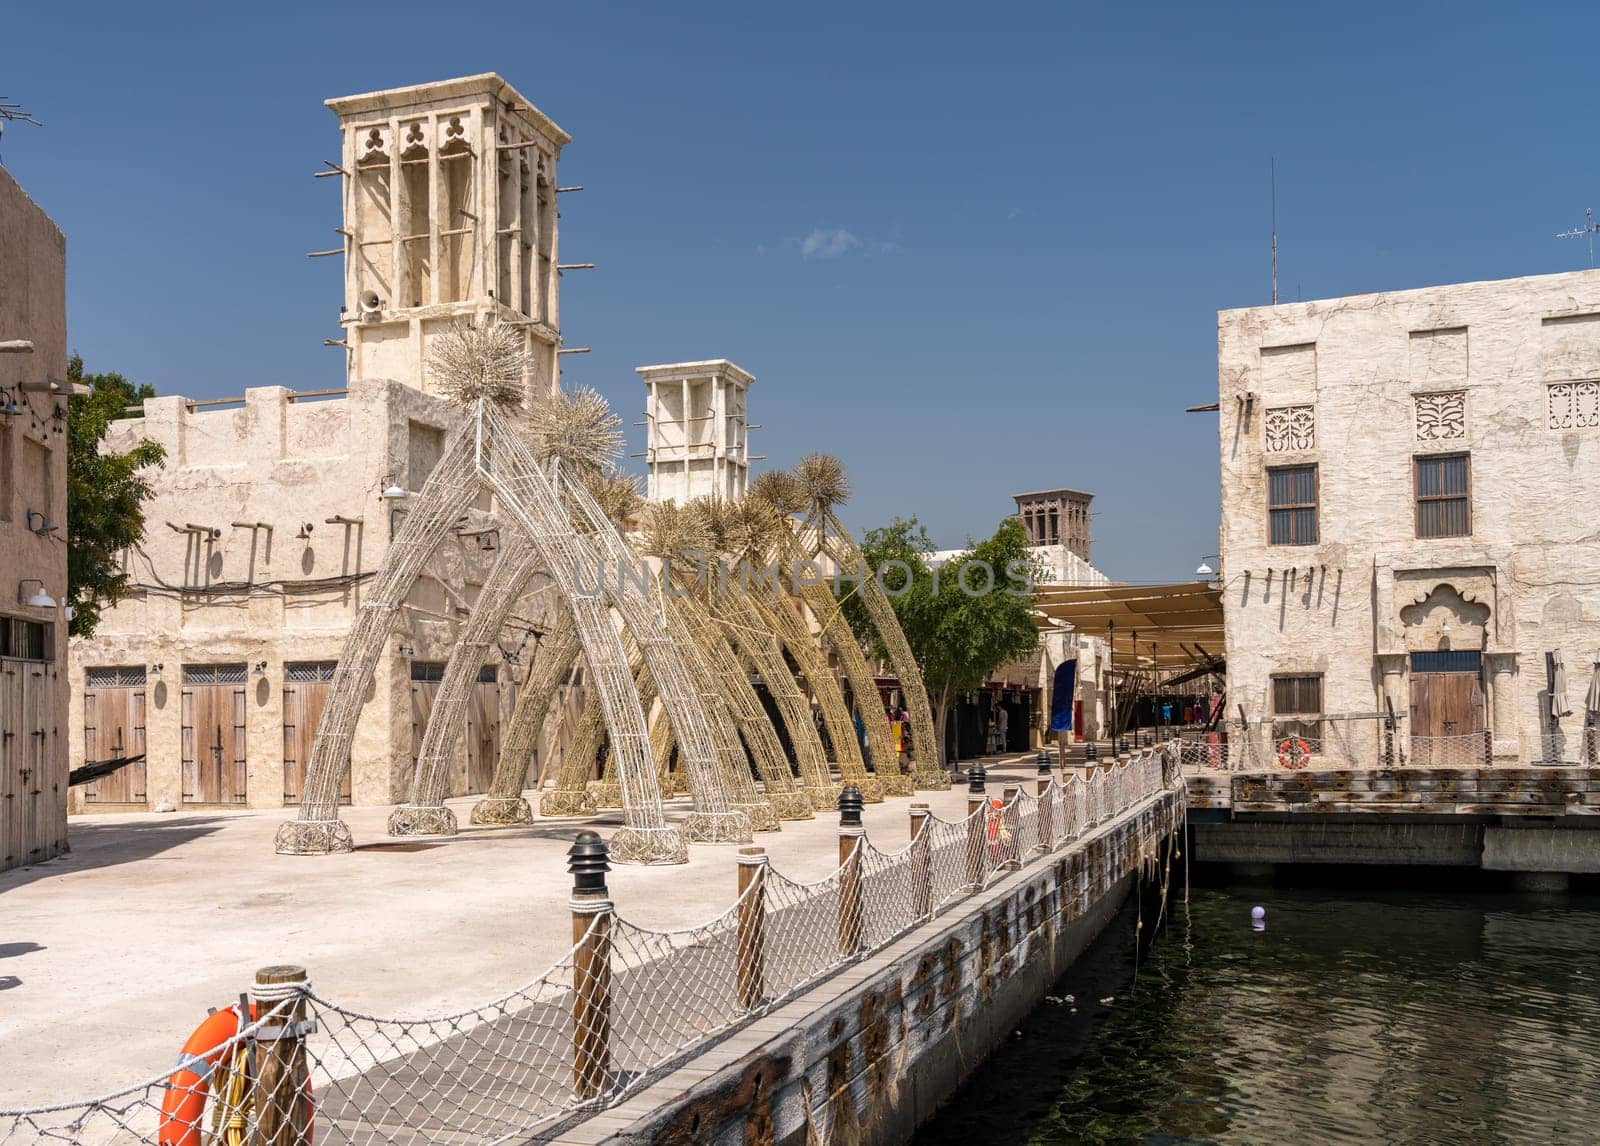 Entrance to the souk in the Old city of Dubai along Al Seef boardwalk during Ramadan